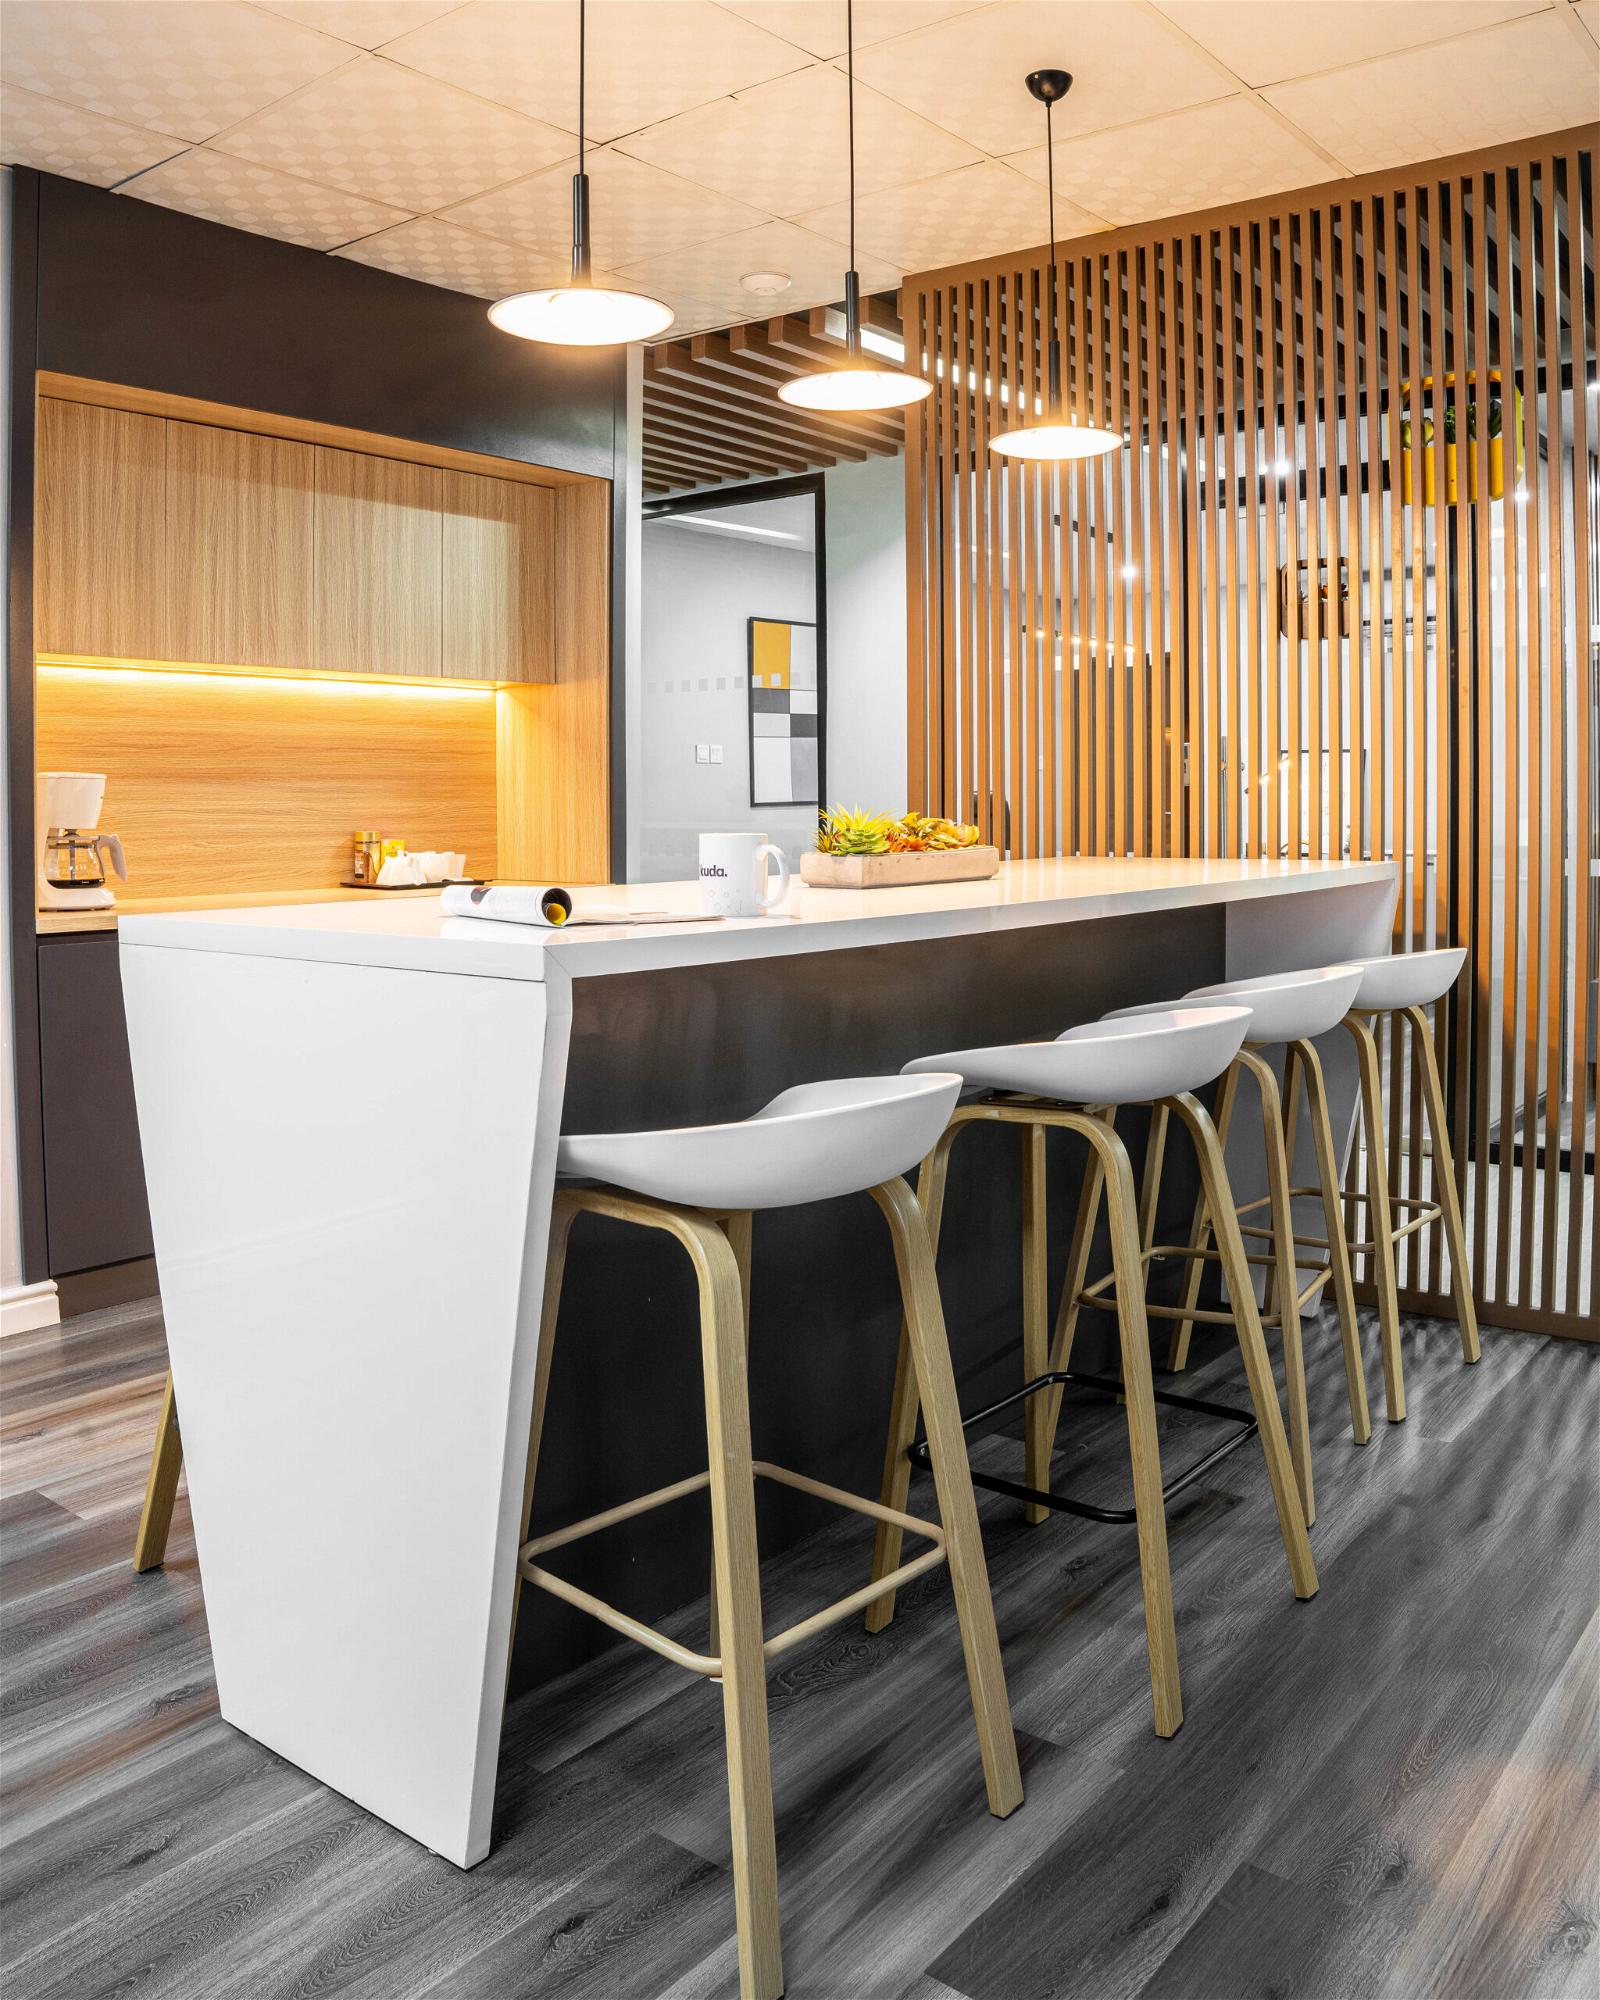 SpazioIdeale designs exciting Lagos office space for Kuda Technologies